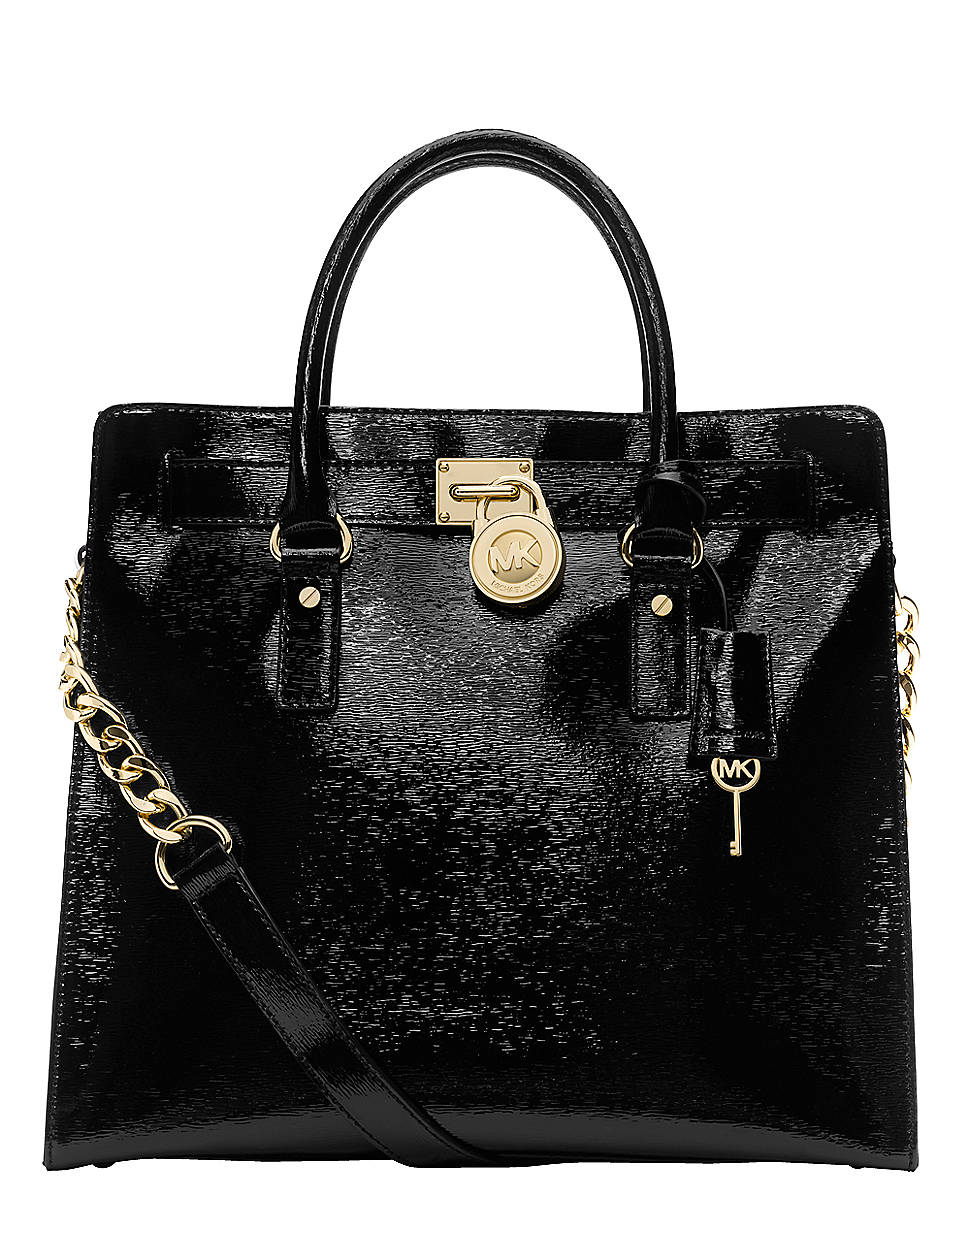 Michael Michael Kors Hamilton Patent Leather North/South Tote Bag in Black | Lyst